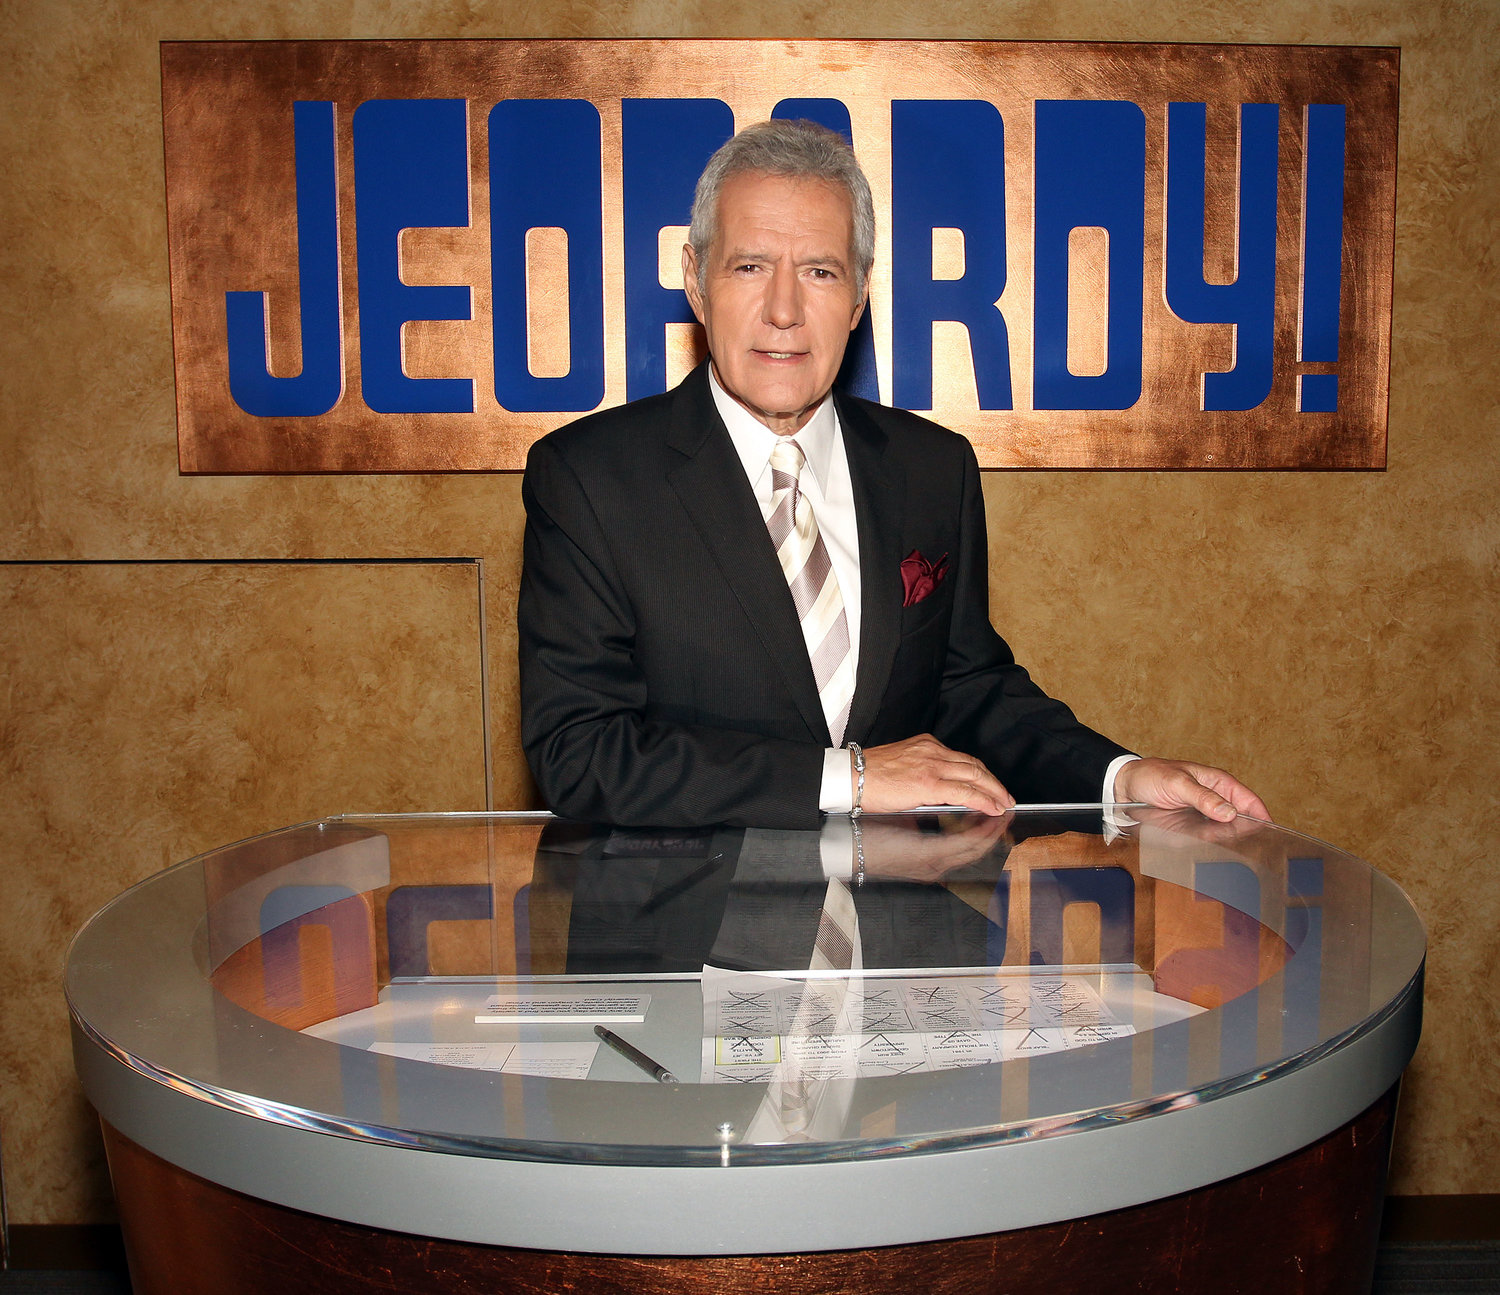 Alex Trebek poses on set at Sony Pictures in Culver City, Calif., for the premier of the 28th season of "Jeopardy," Sept. 20, 2011.